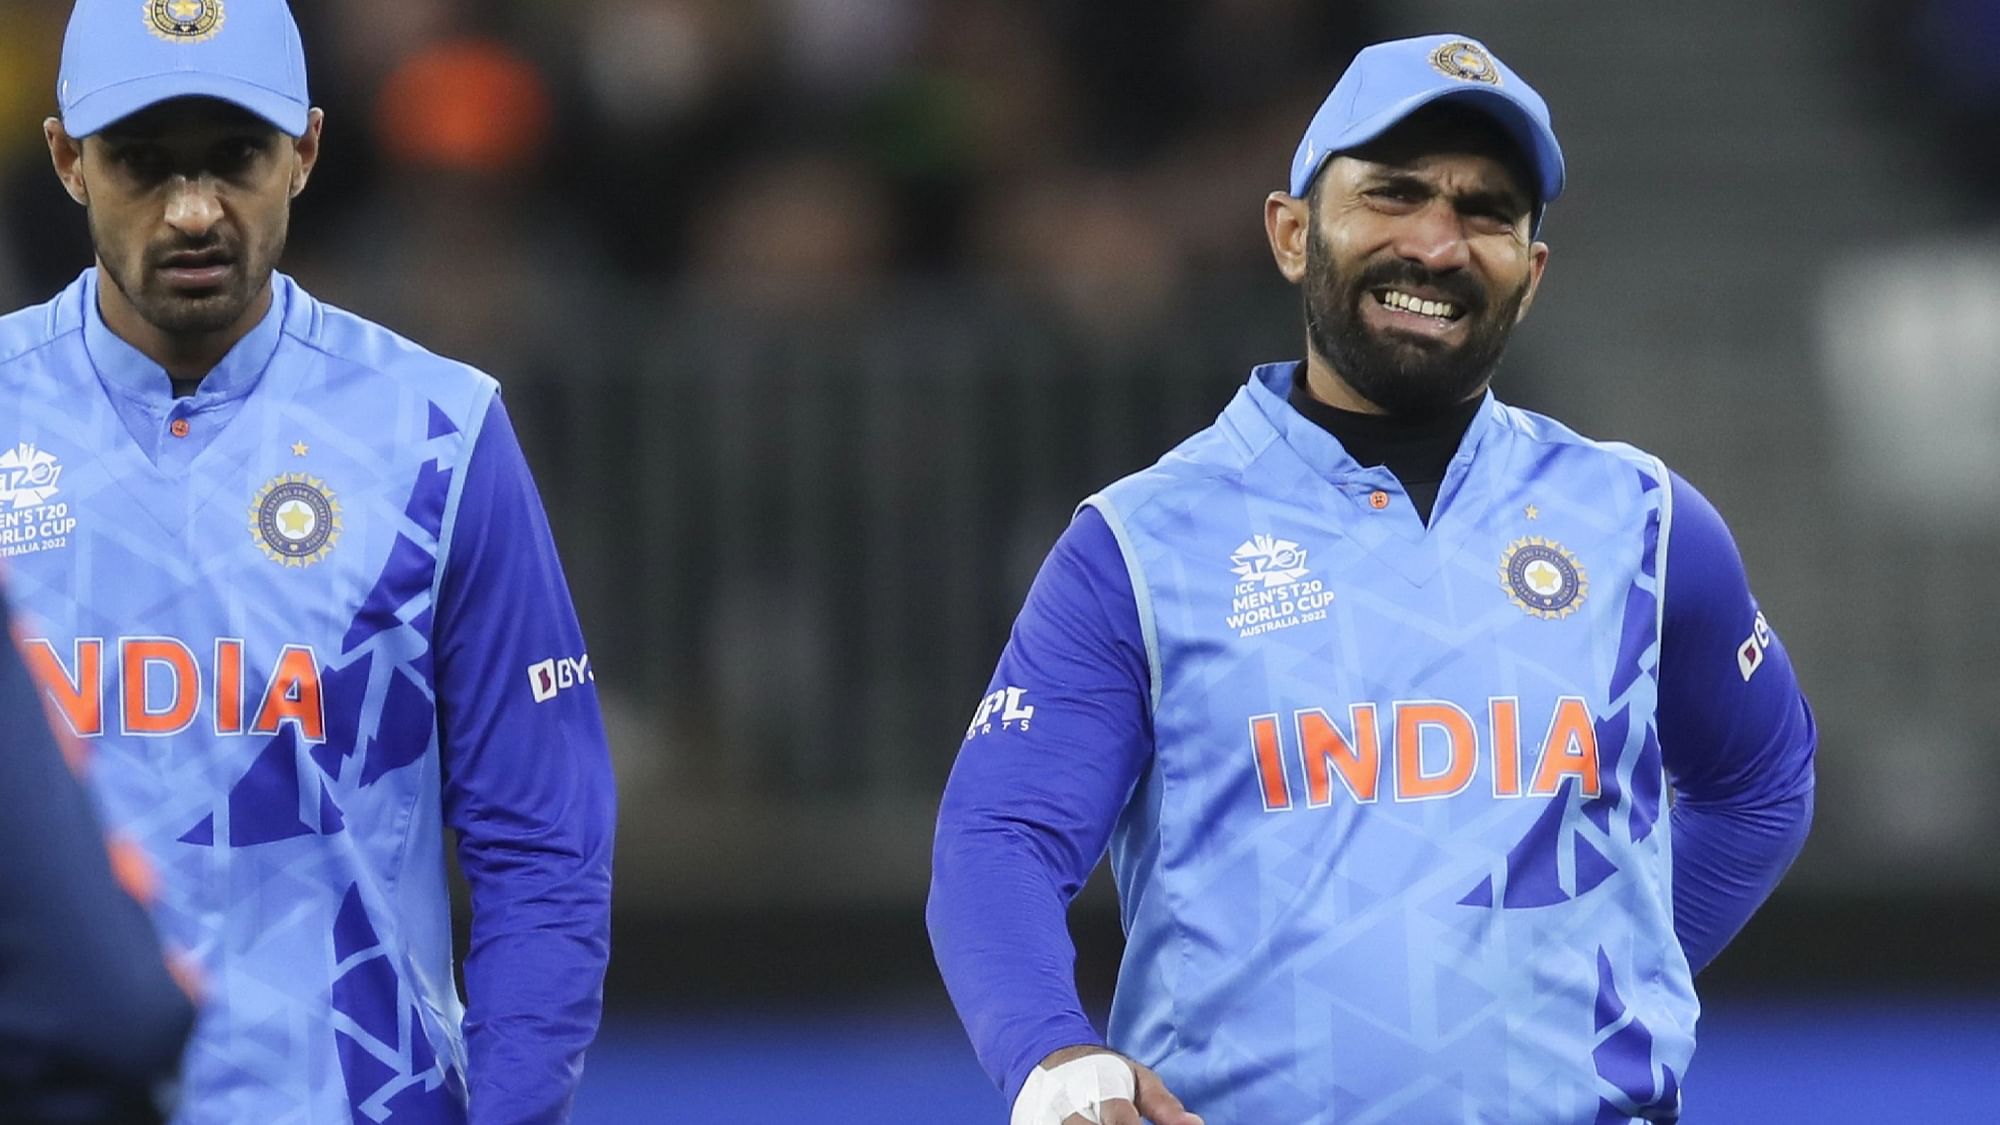 <div class="paragraphs"><p>Dinesh Karthik was forced to go off the field during the T20 World Cup match against South Africa, due to an injury.</p></div>